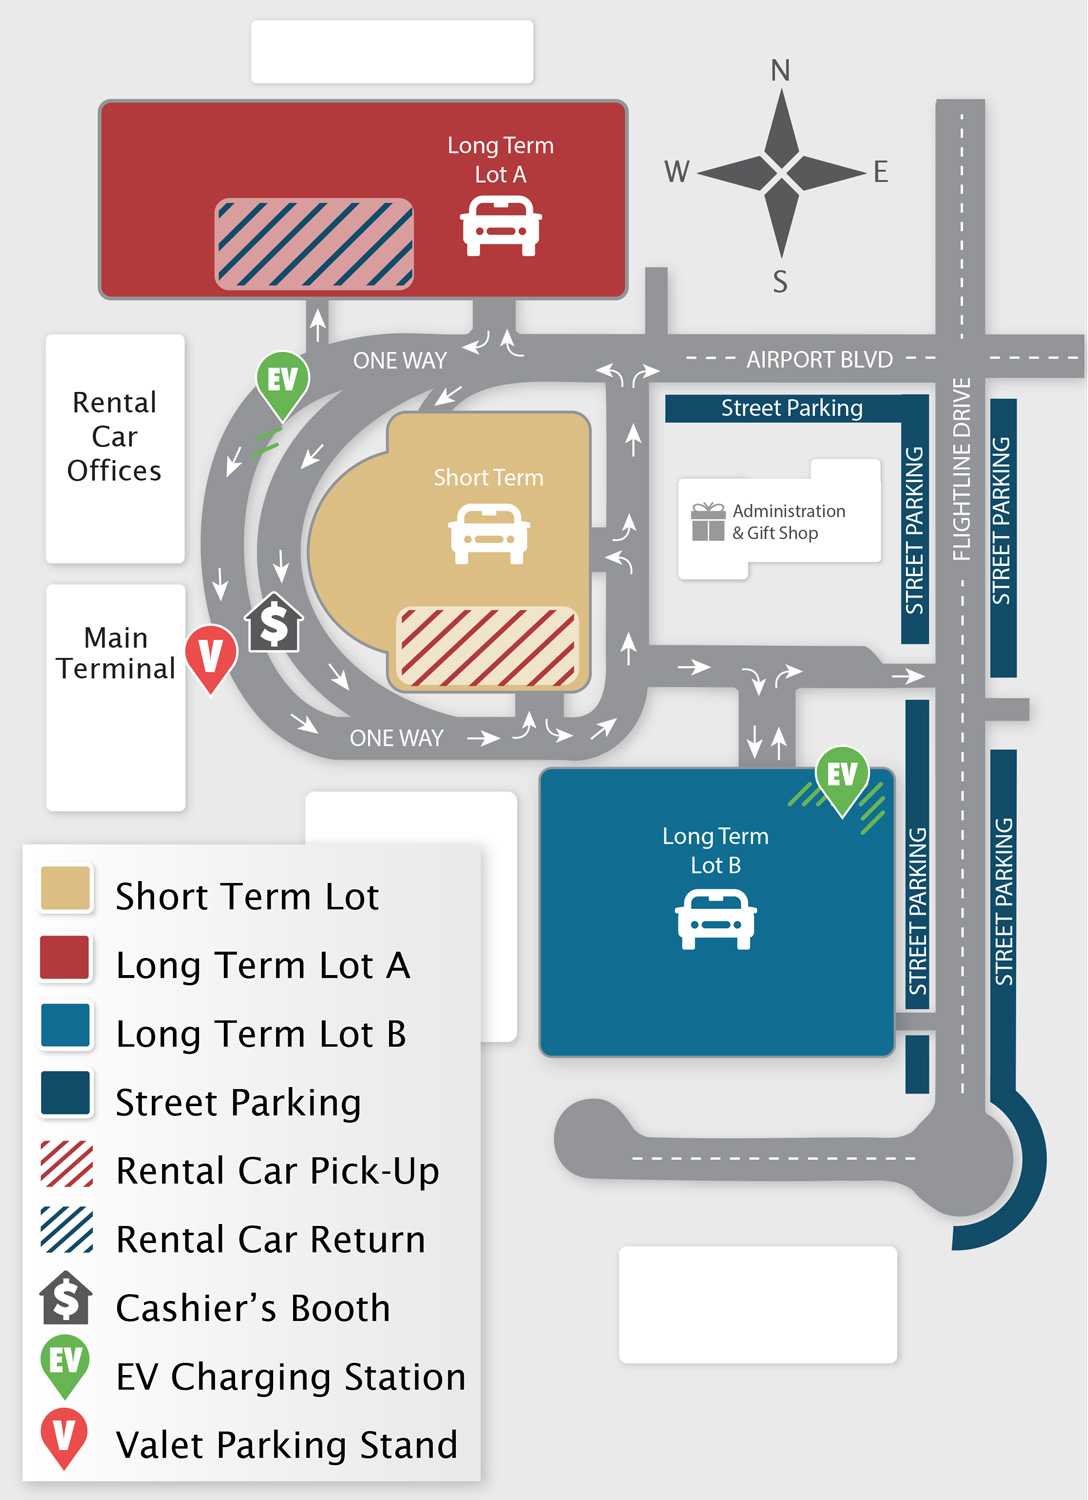 STS Airport Parking Map